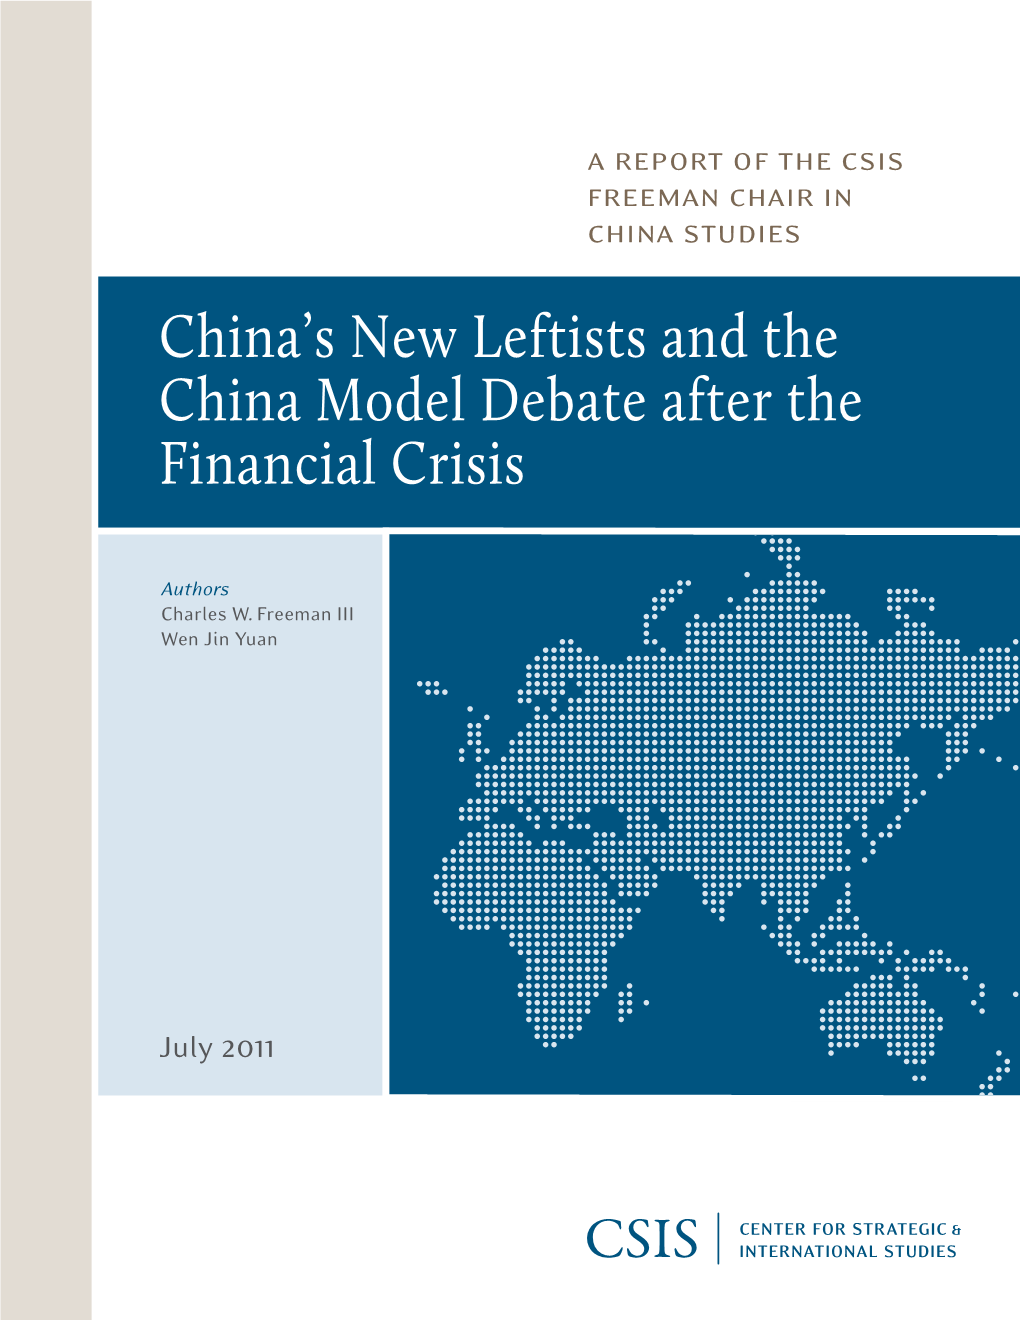 China's New Leftists and the China Model Debate After the Financial